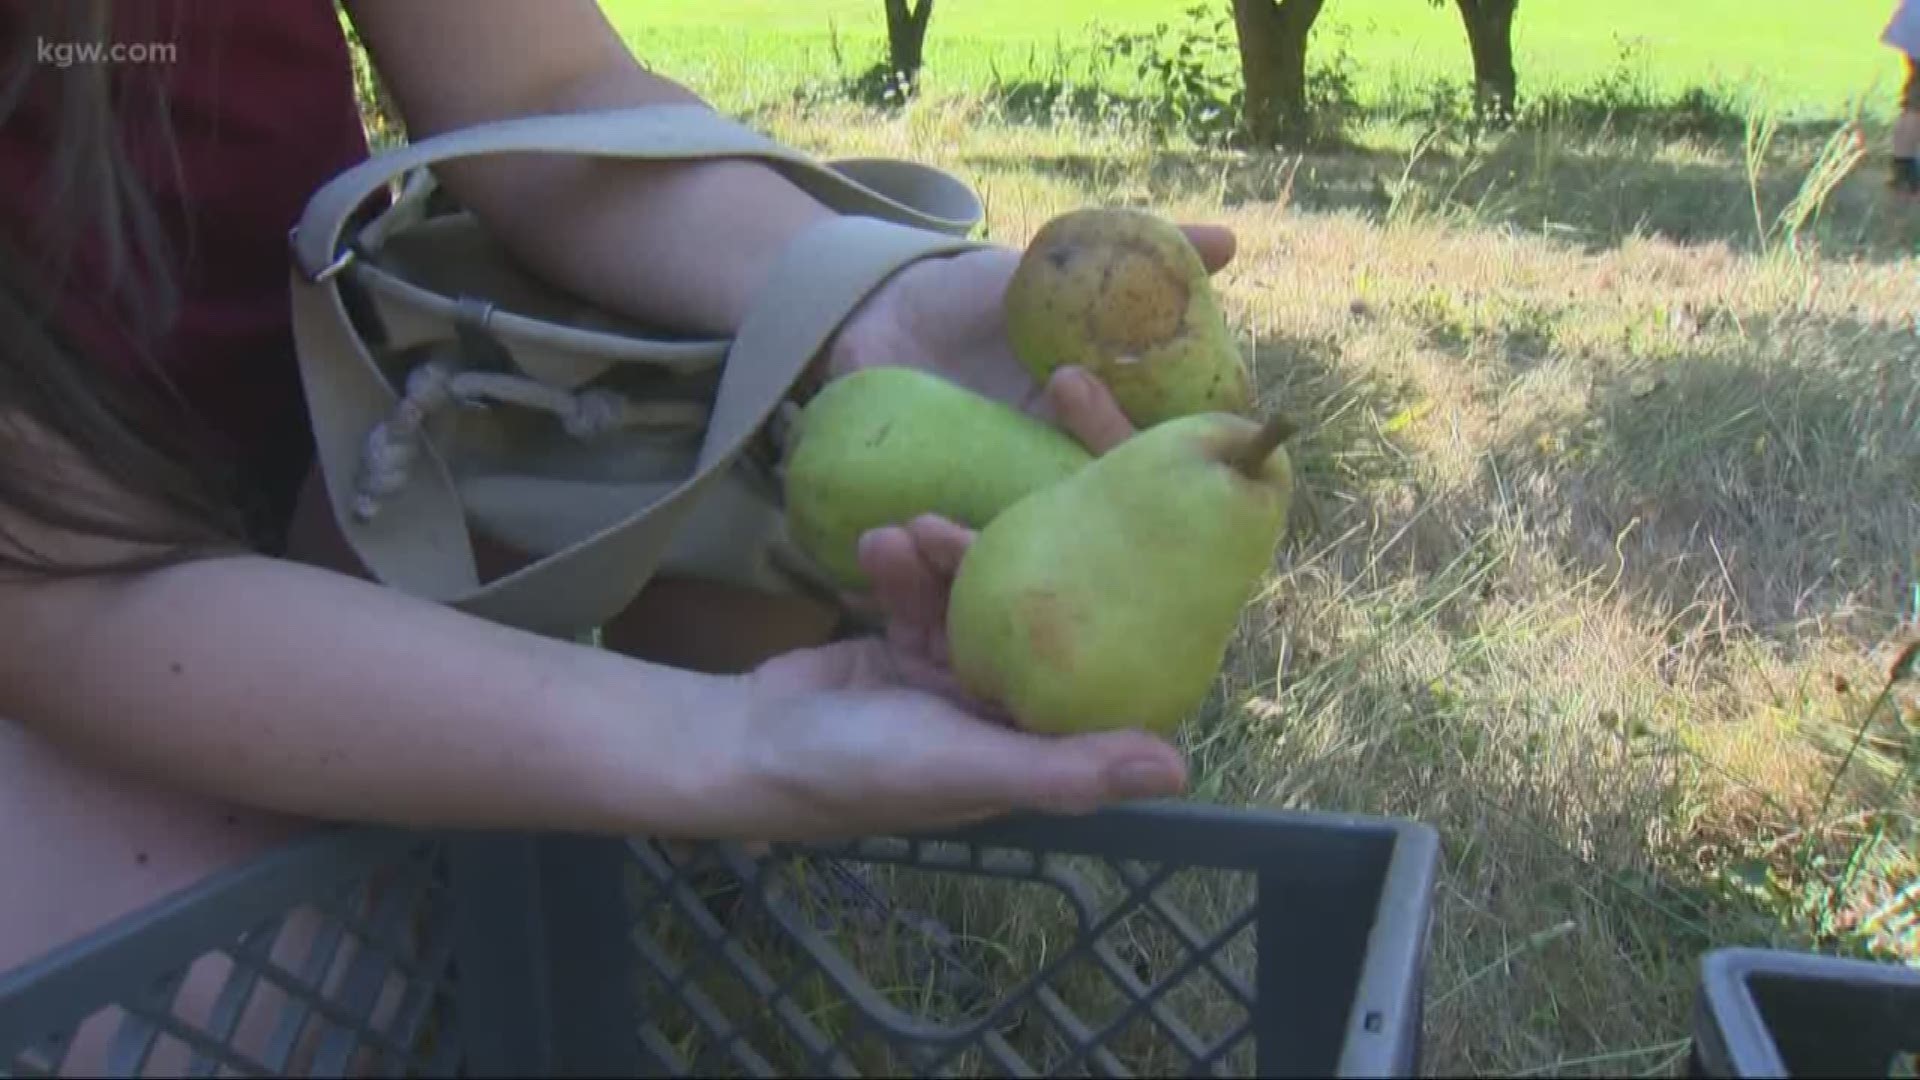 Pick A Pear-A-Thon harvest is on!